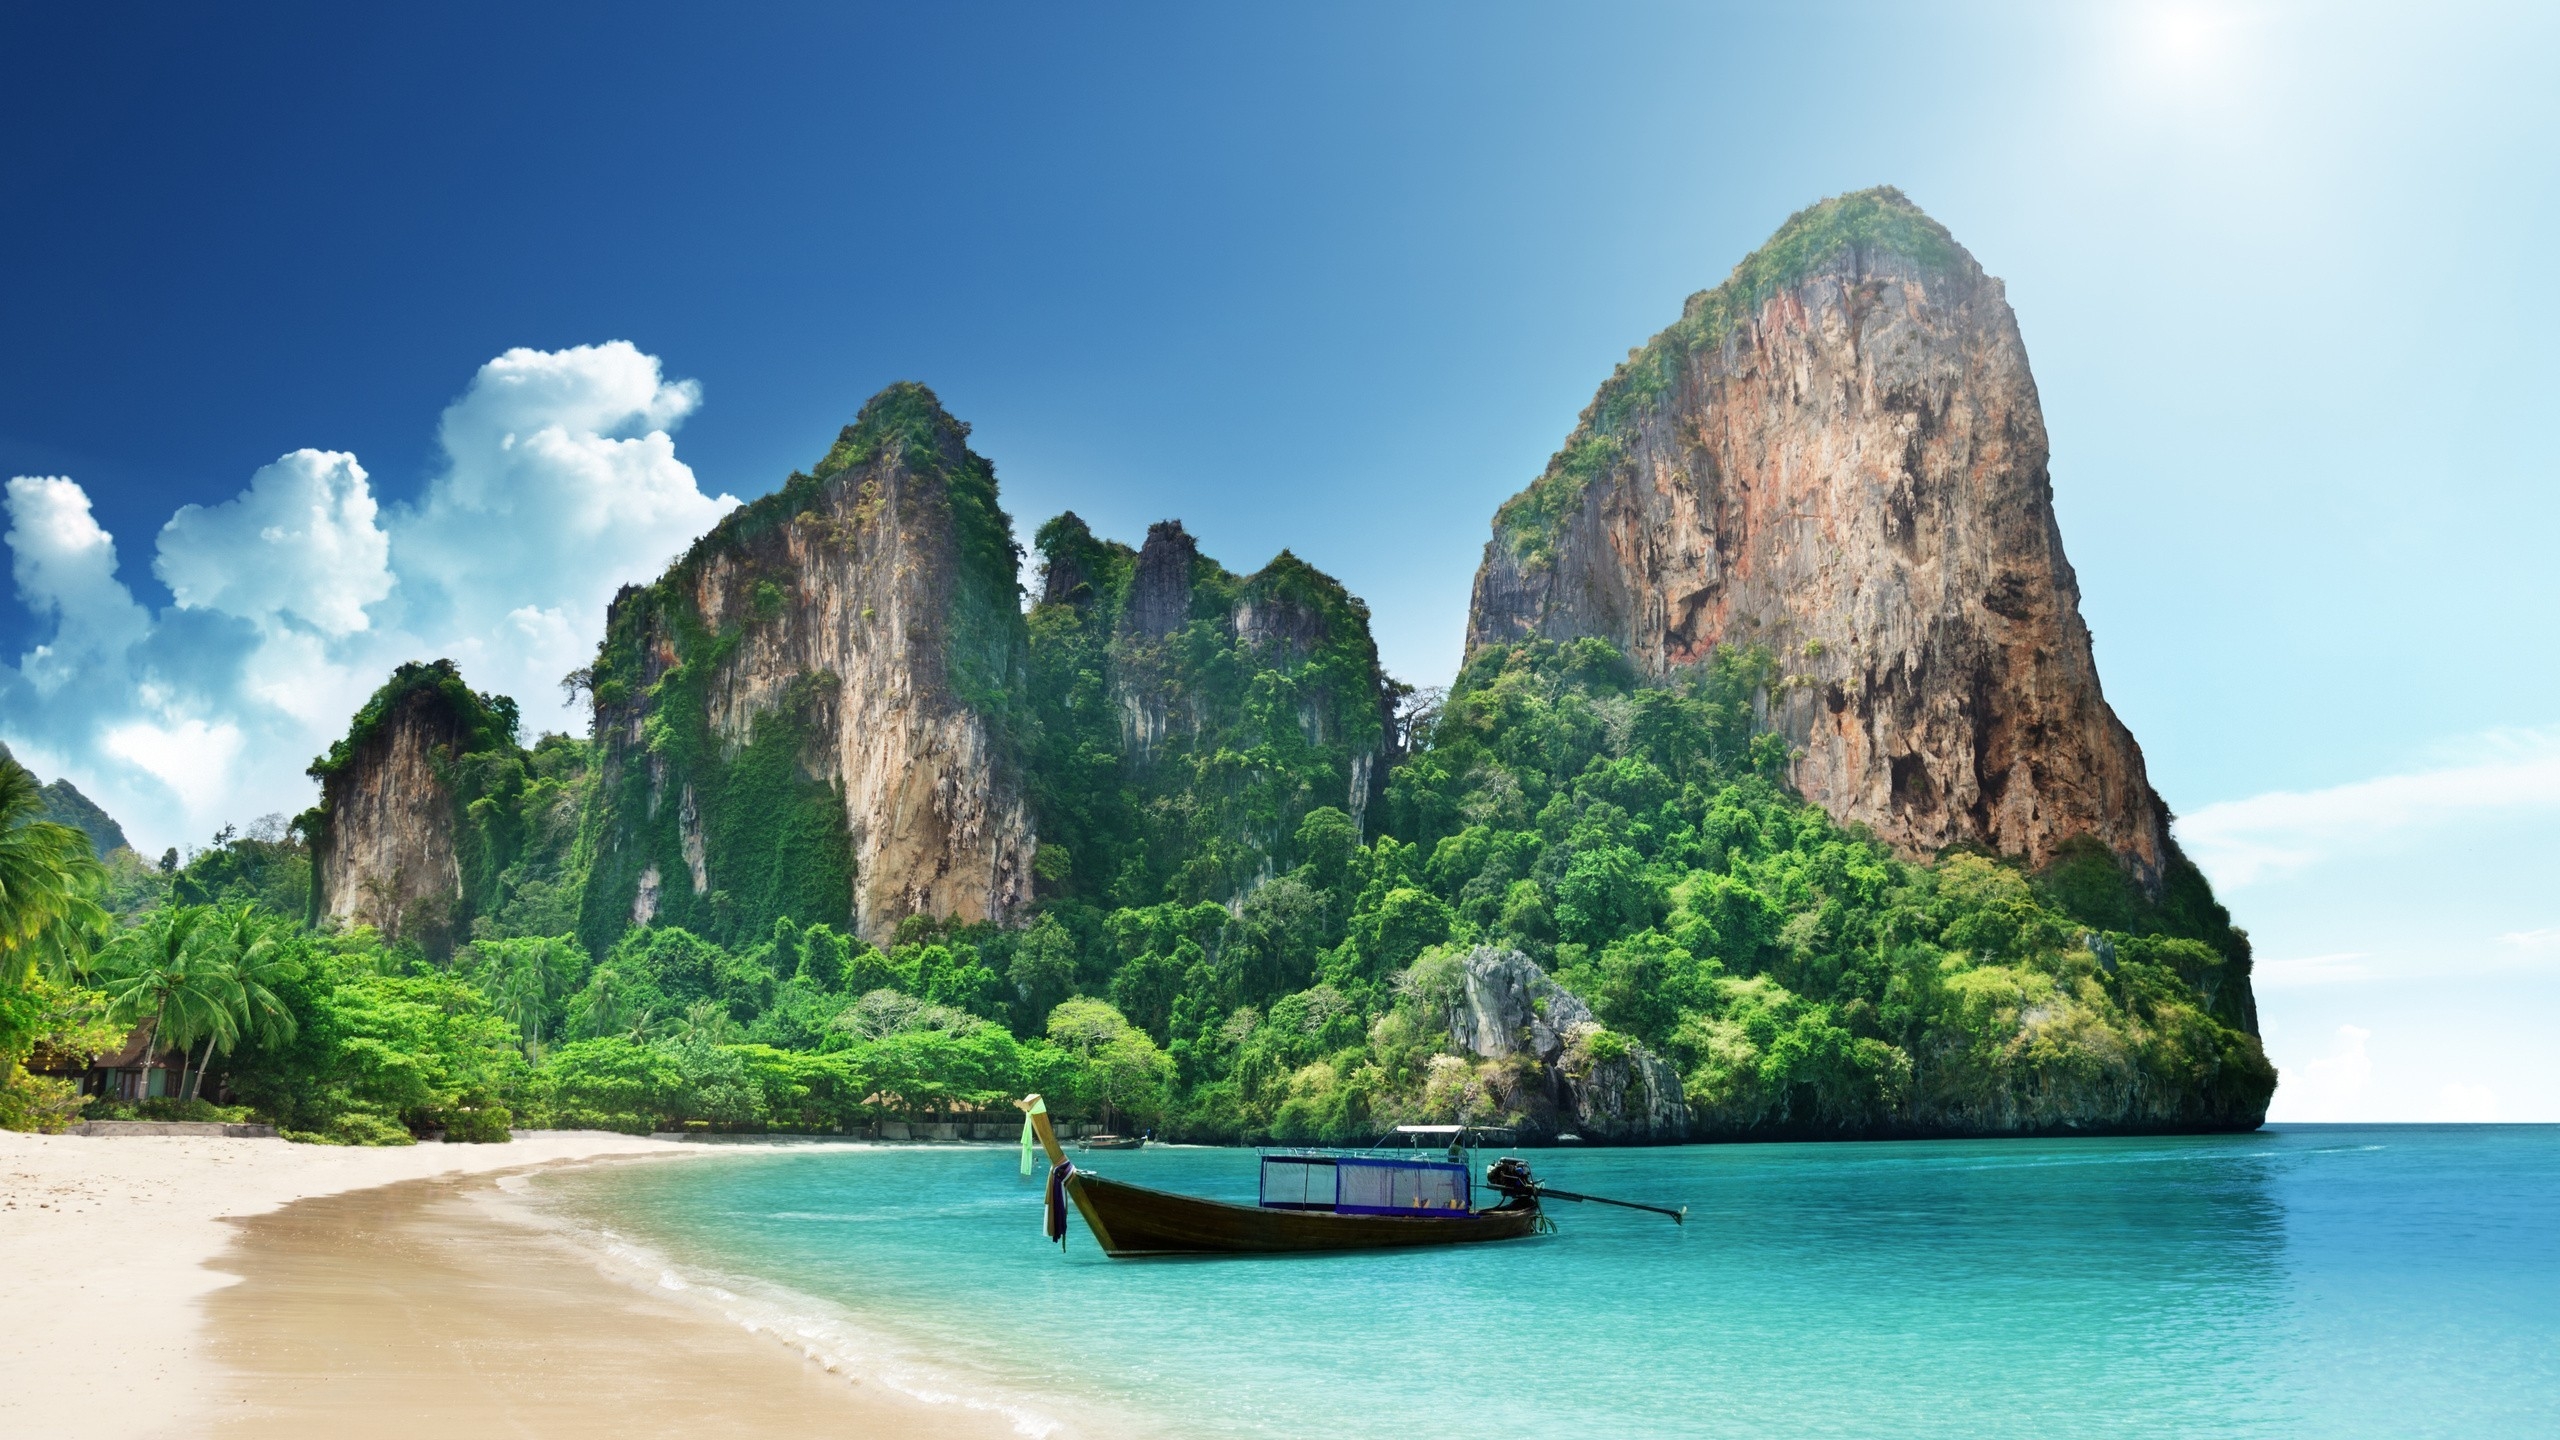 Superb View from Thailand for 2560x1440 HDTV resolution